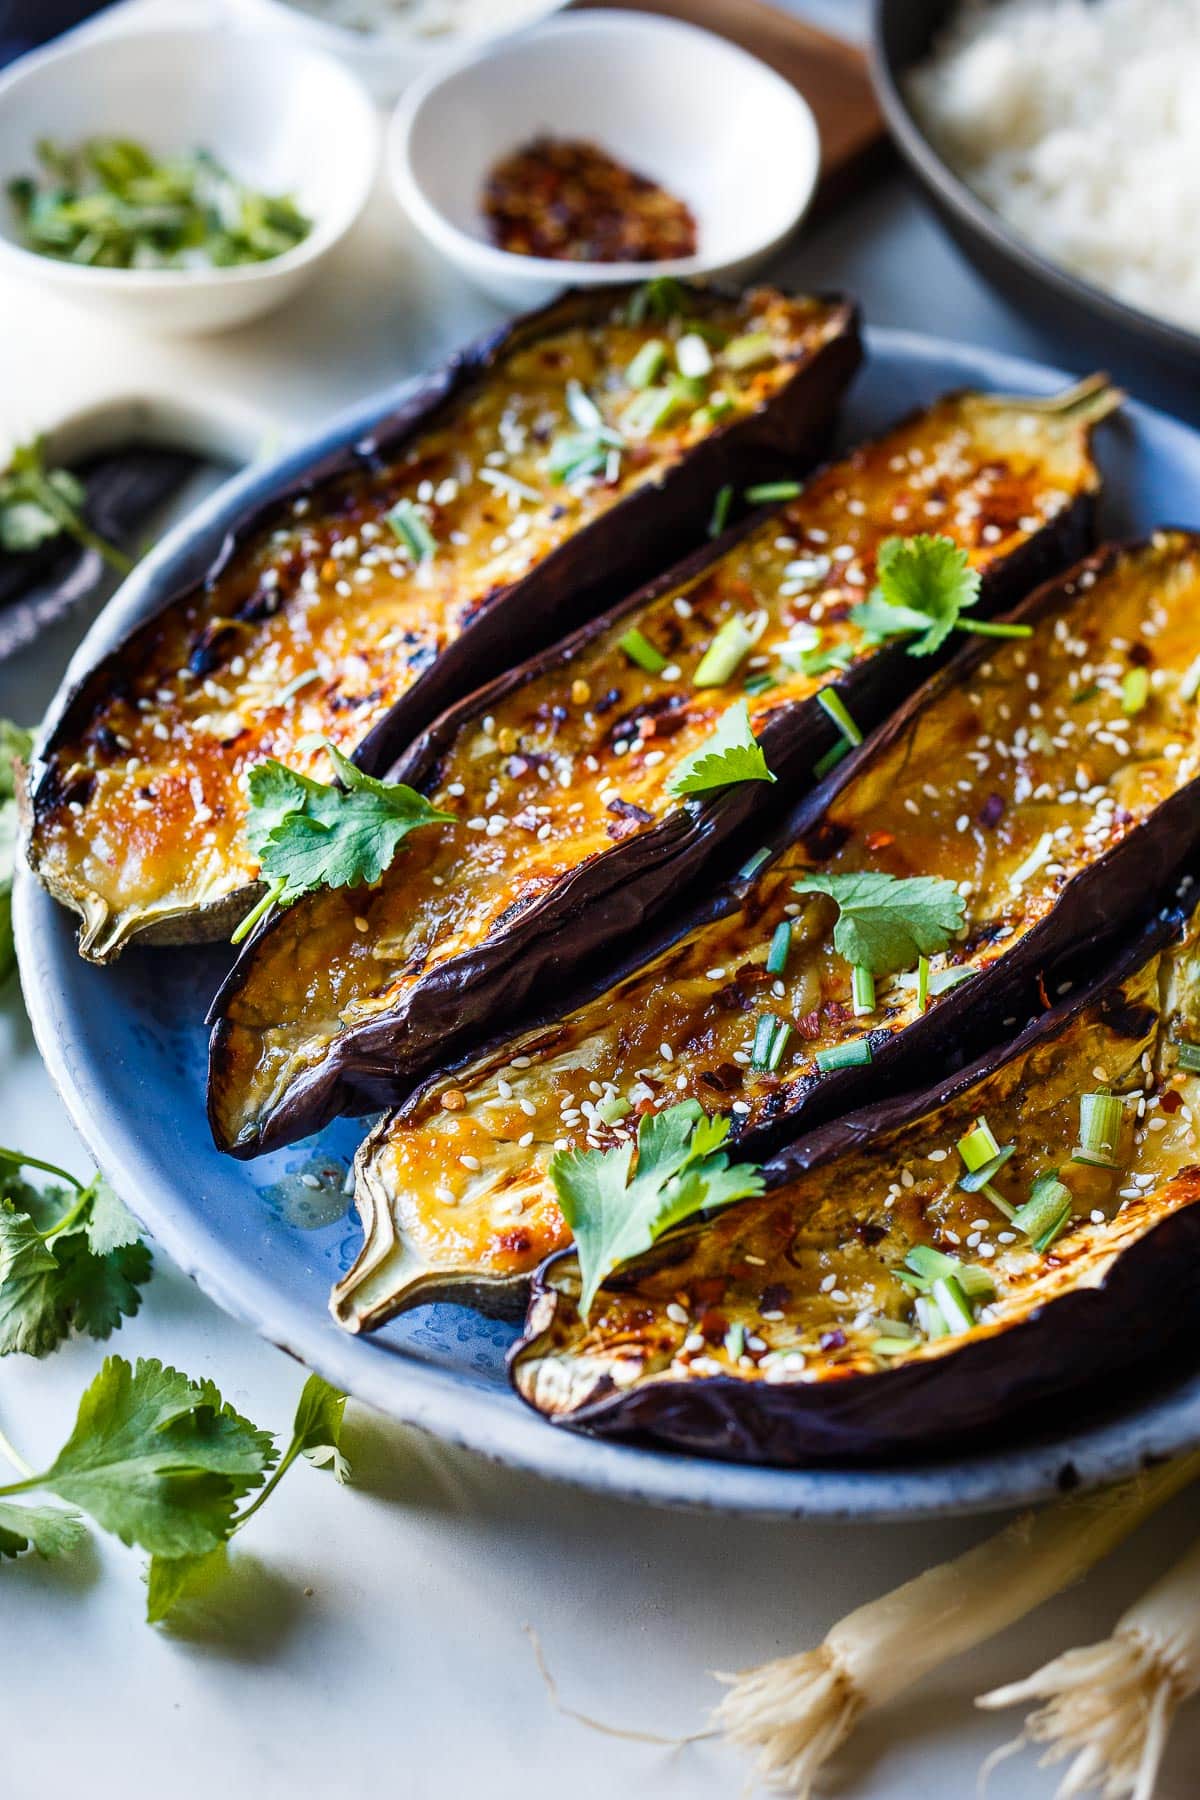 Miso glazed Eggplant with scallions and sesame seeds on a plate.